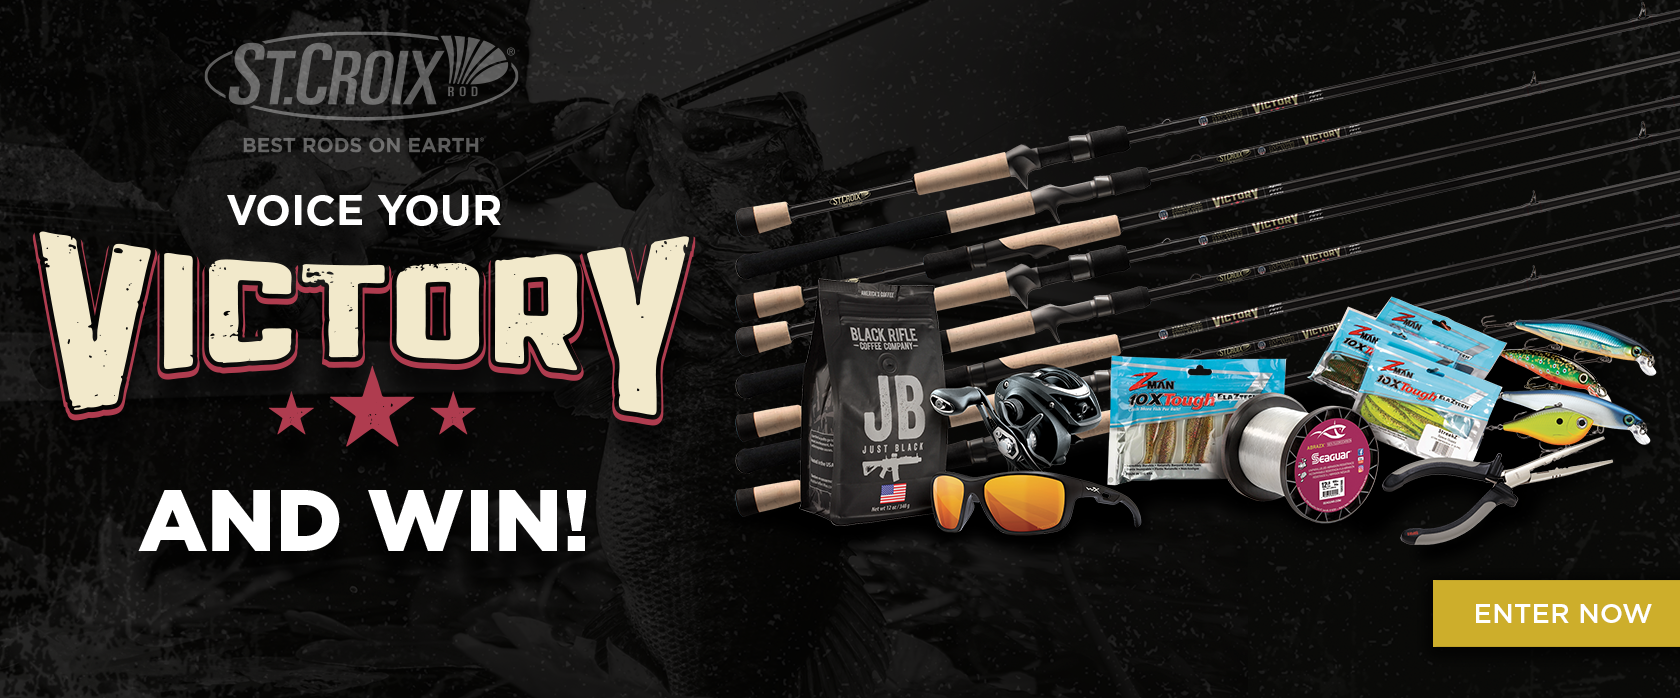 Up to 50% Off Select St. Croix Rods! - Fish USA